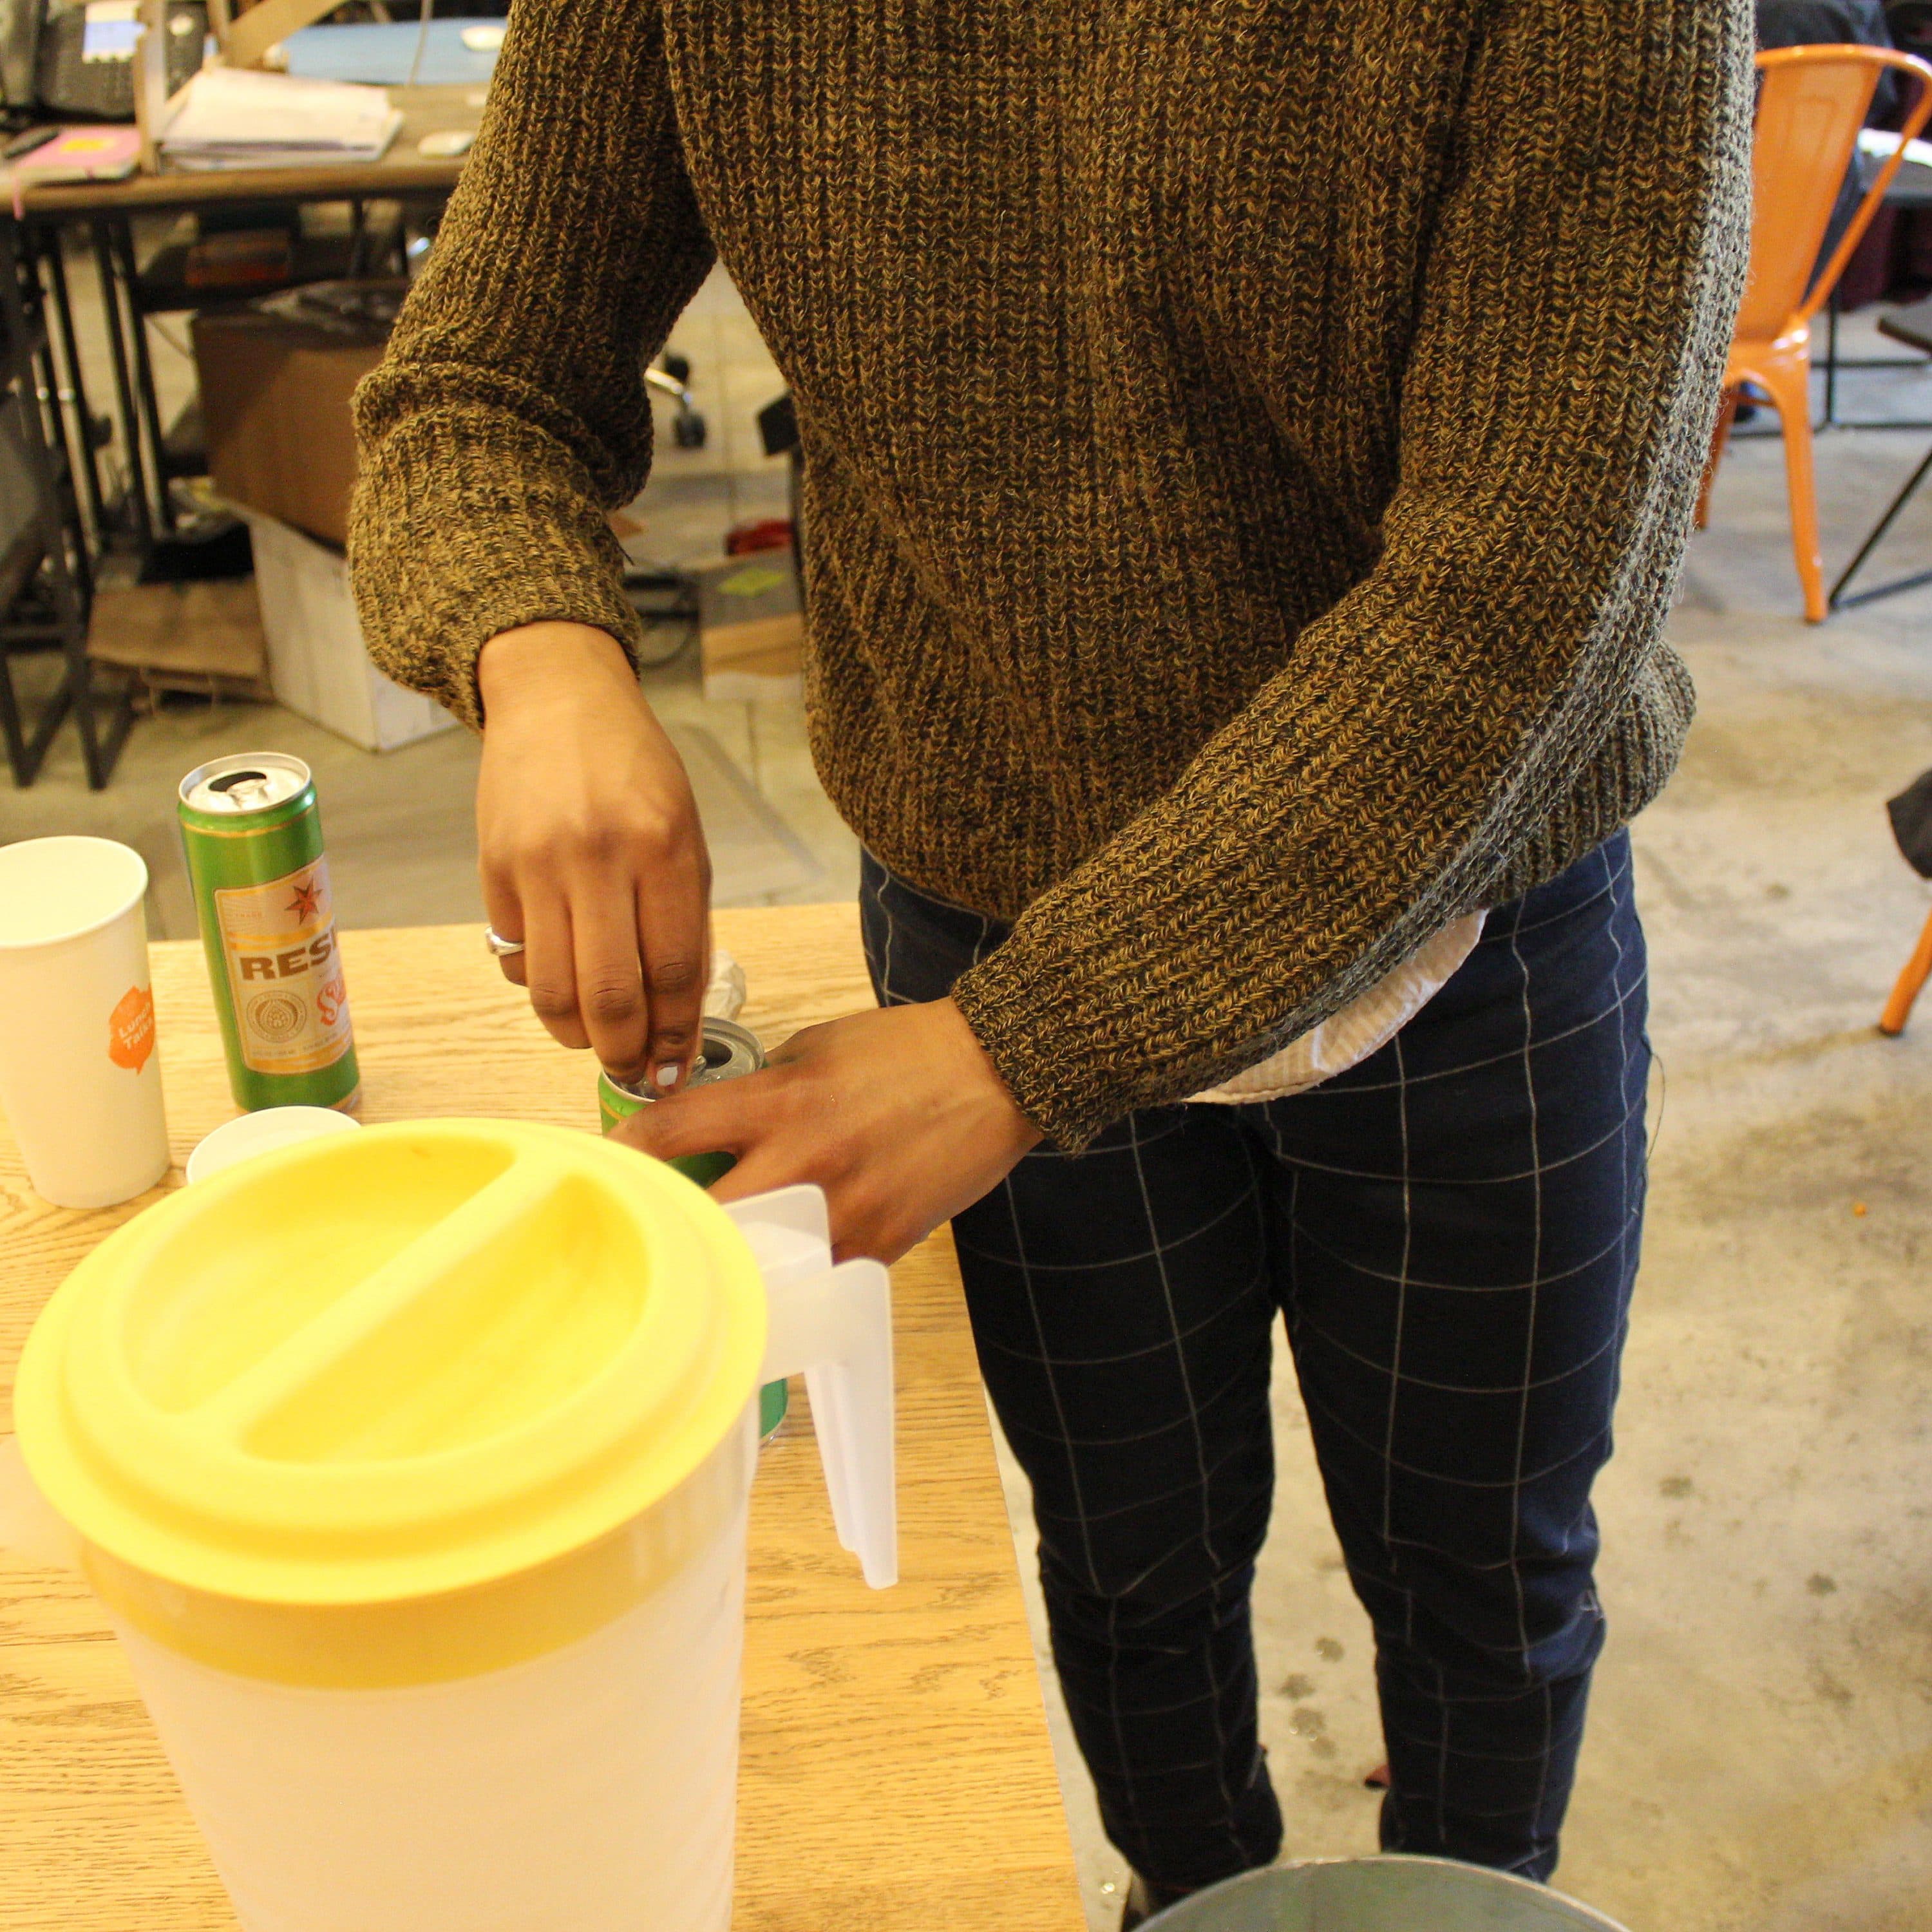 A person in a brown sweater is pouring a beverage from a yellow-lidded container into a transparent cup. There's a green can and several empty cups on the wooden table. The scene appears to be in a casual indoor setting with chairs and other items in the background.